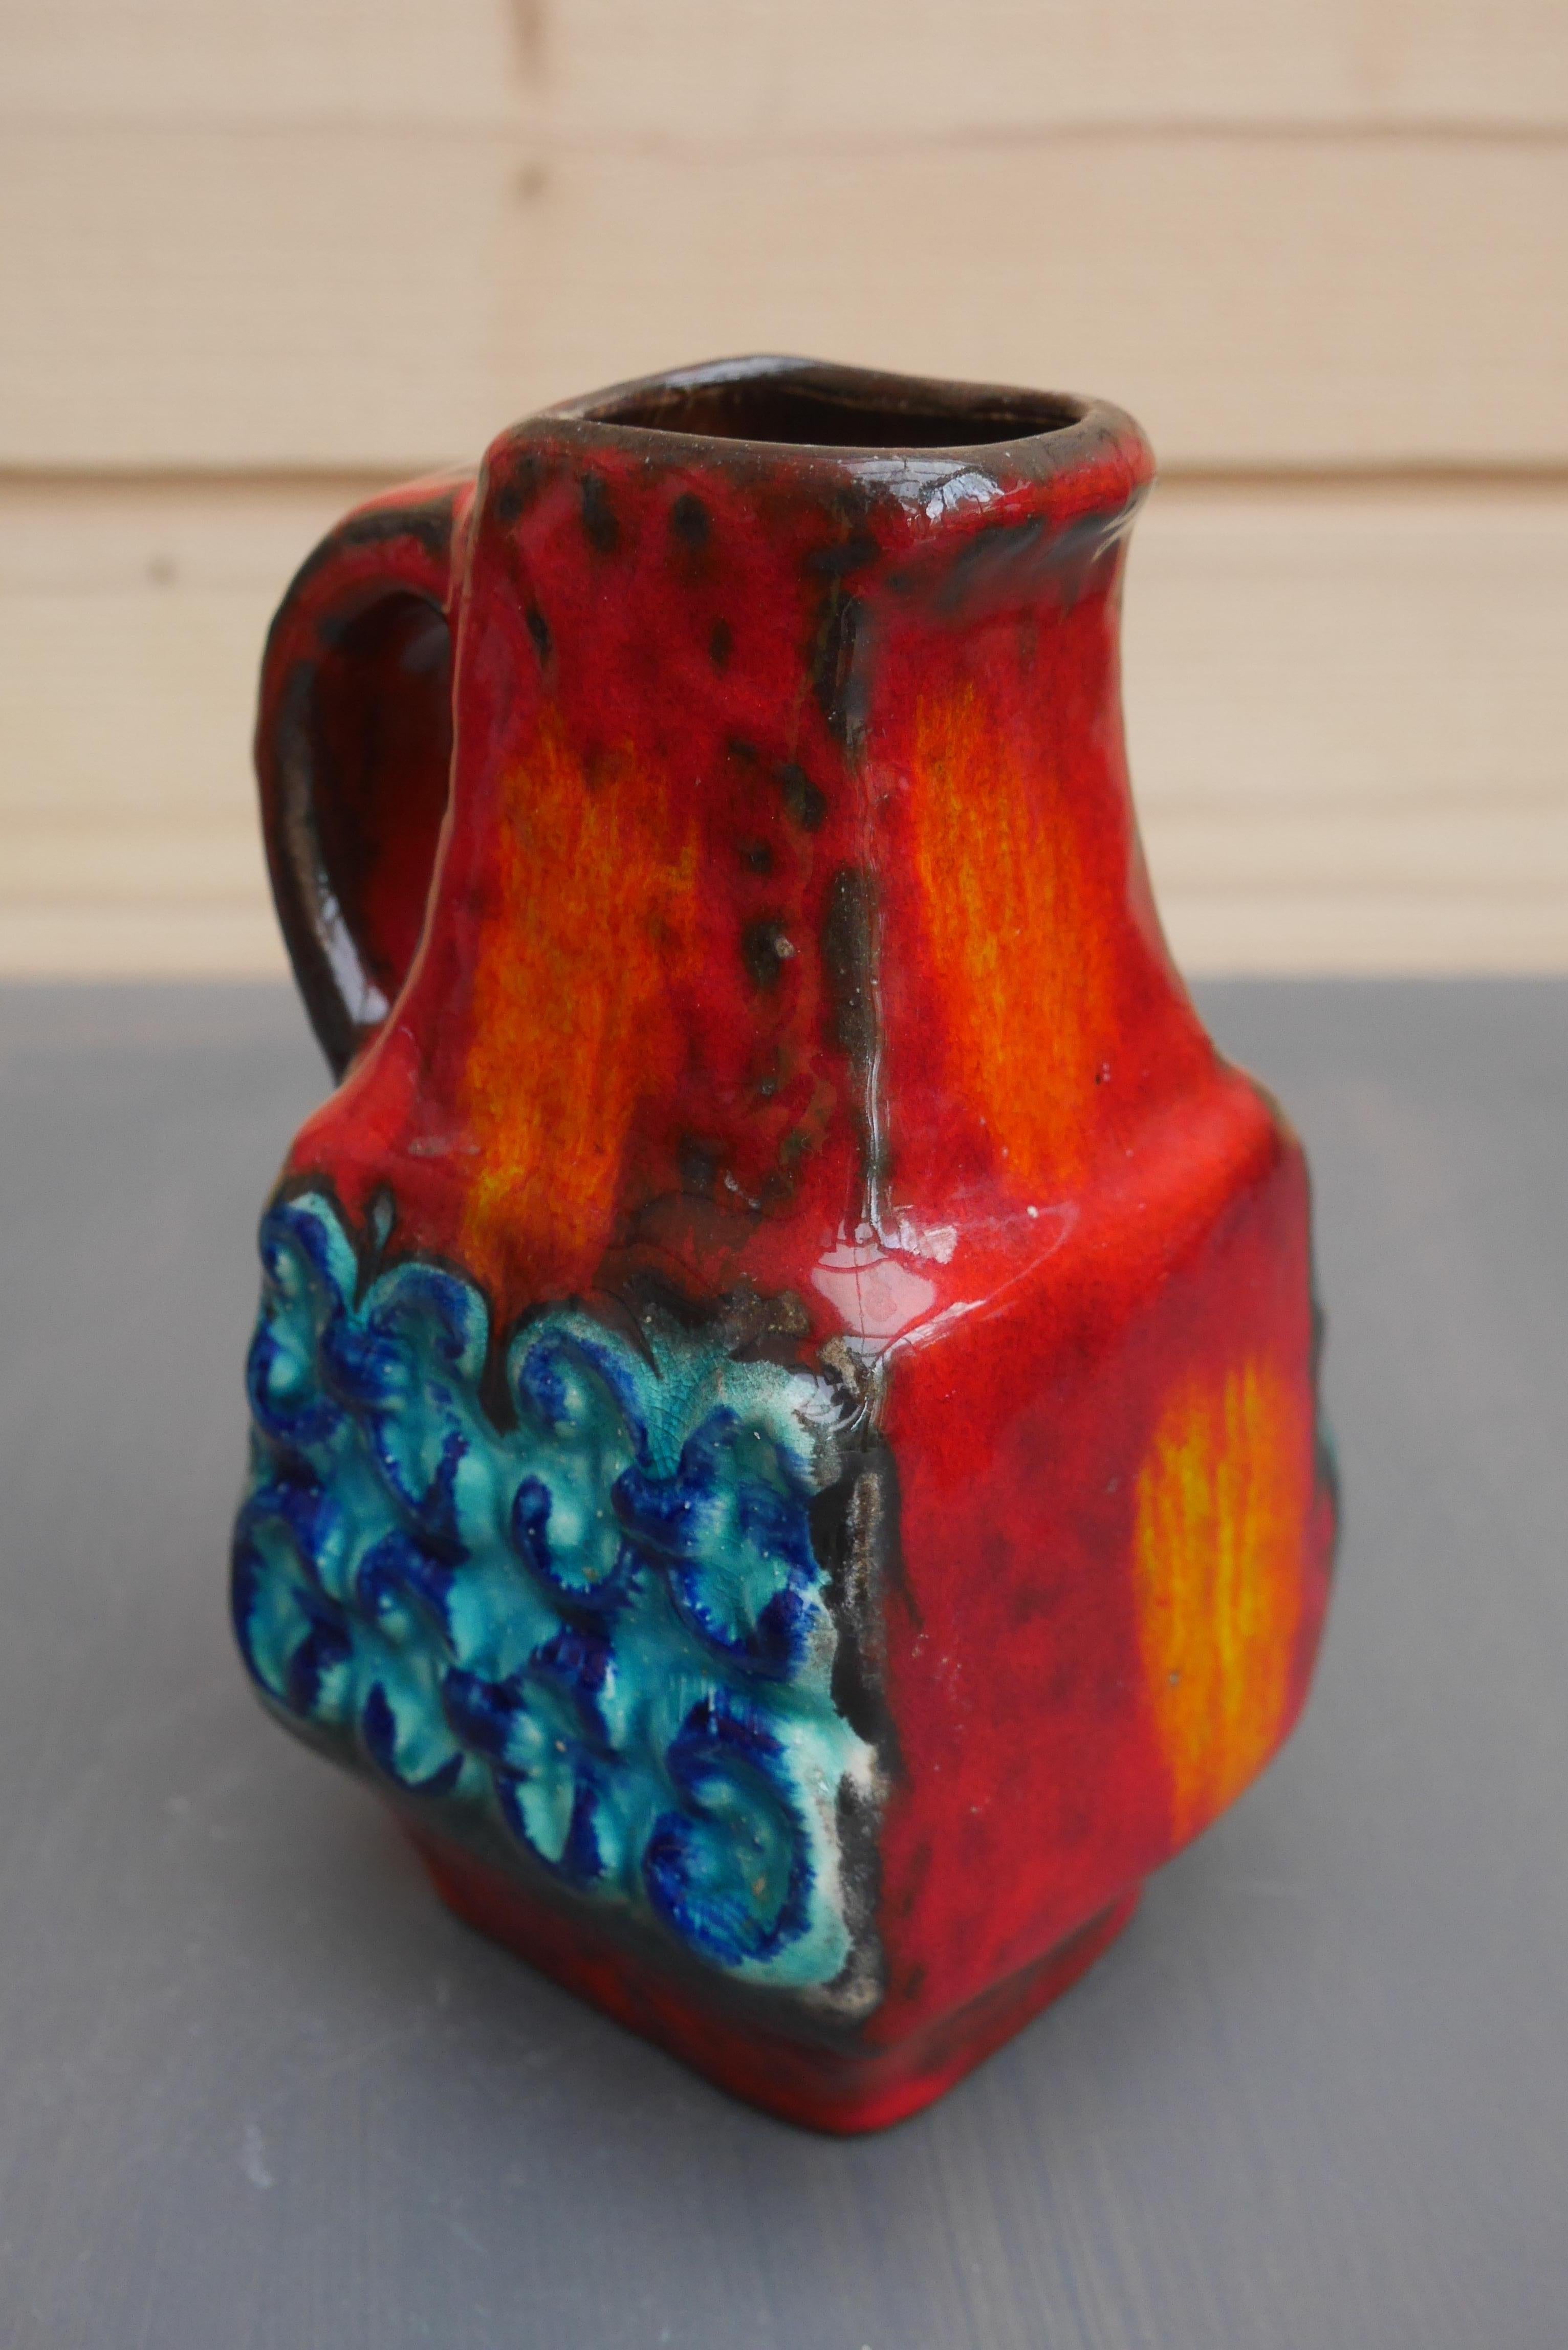 Ceramic Pitcher or Vase from West Germany, 1970s